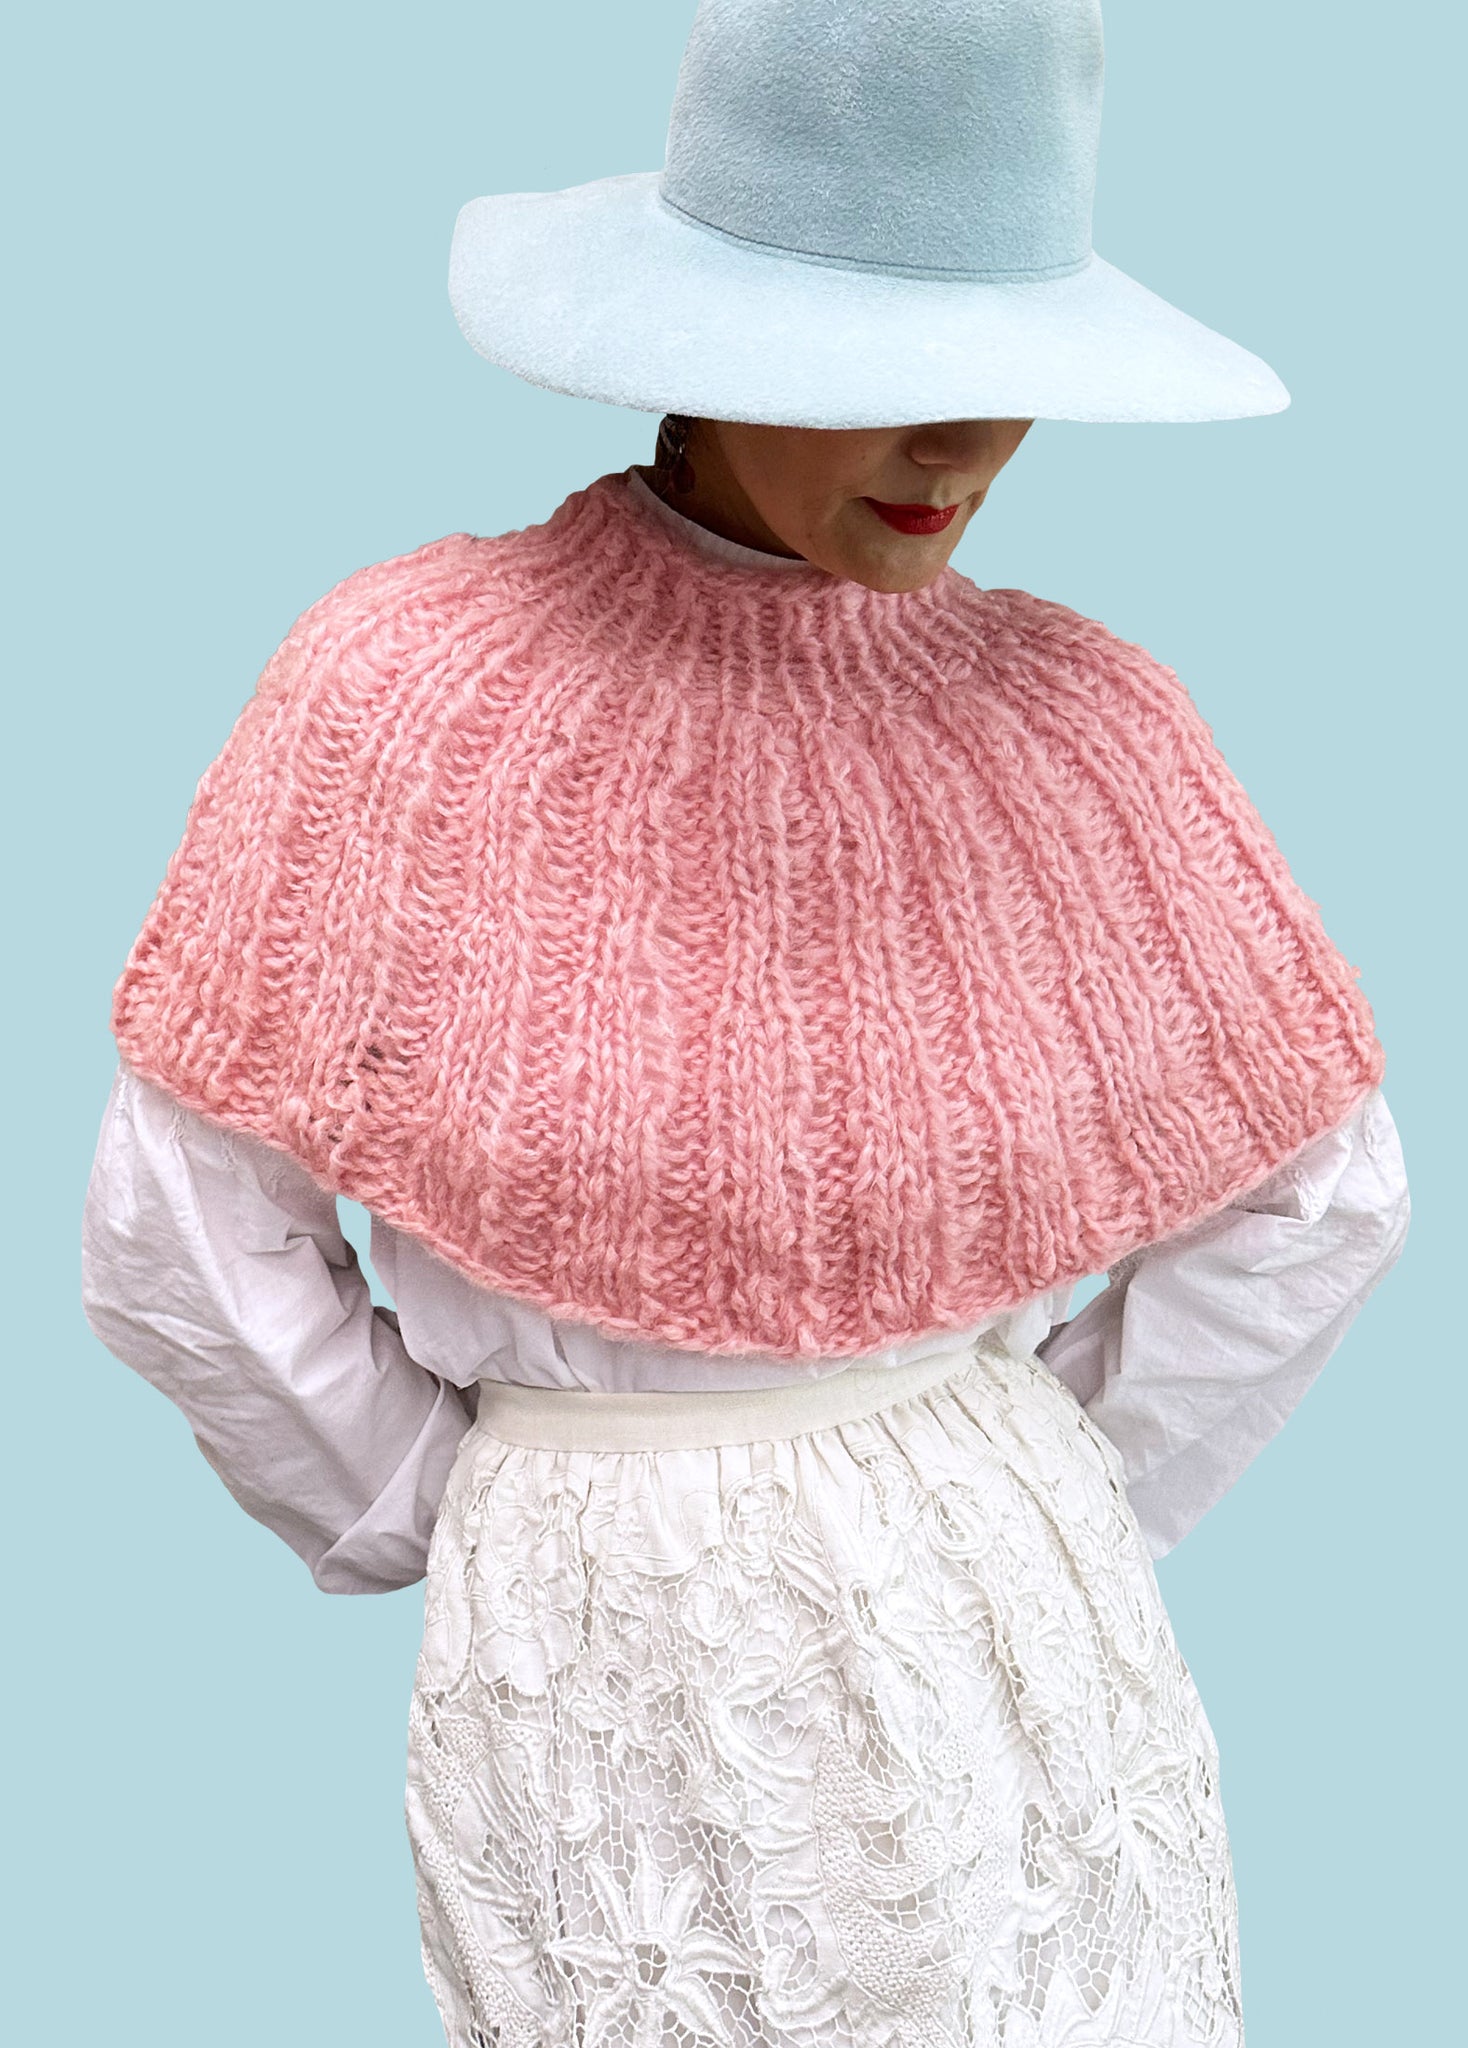 DIY Kit - Andalusia - Mohair So Soft